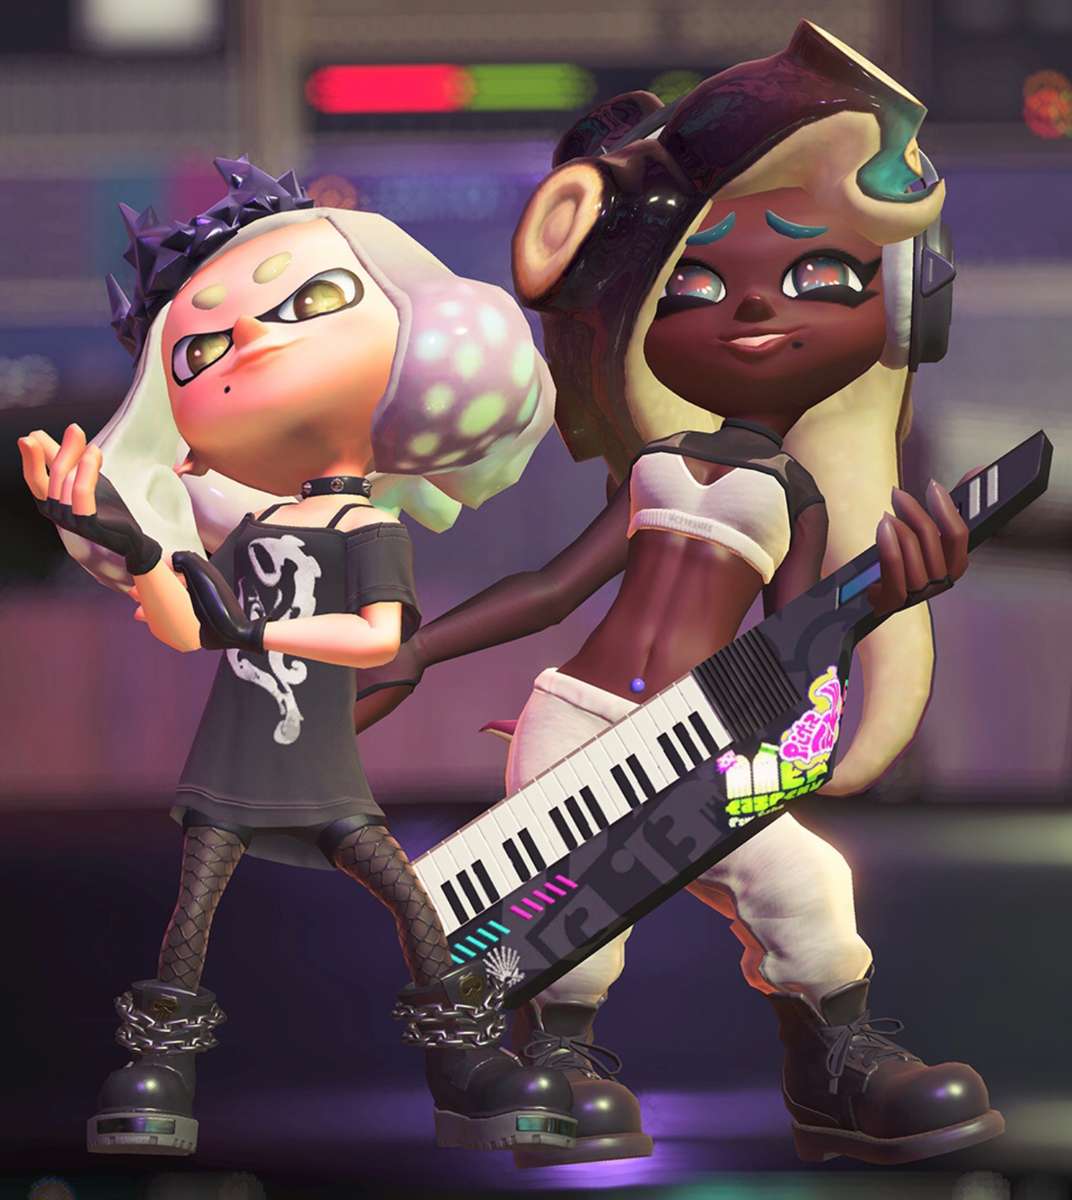 Off the Hook (kostiumy wiosenne) ❤️❤️❤️ puzzle online